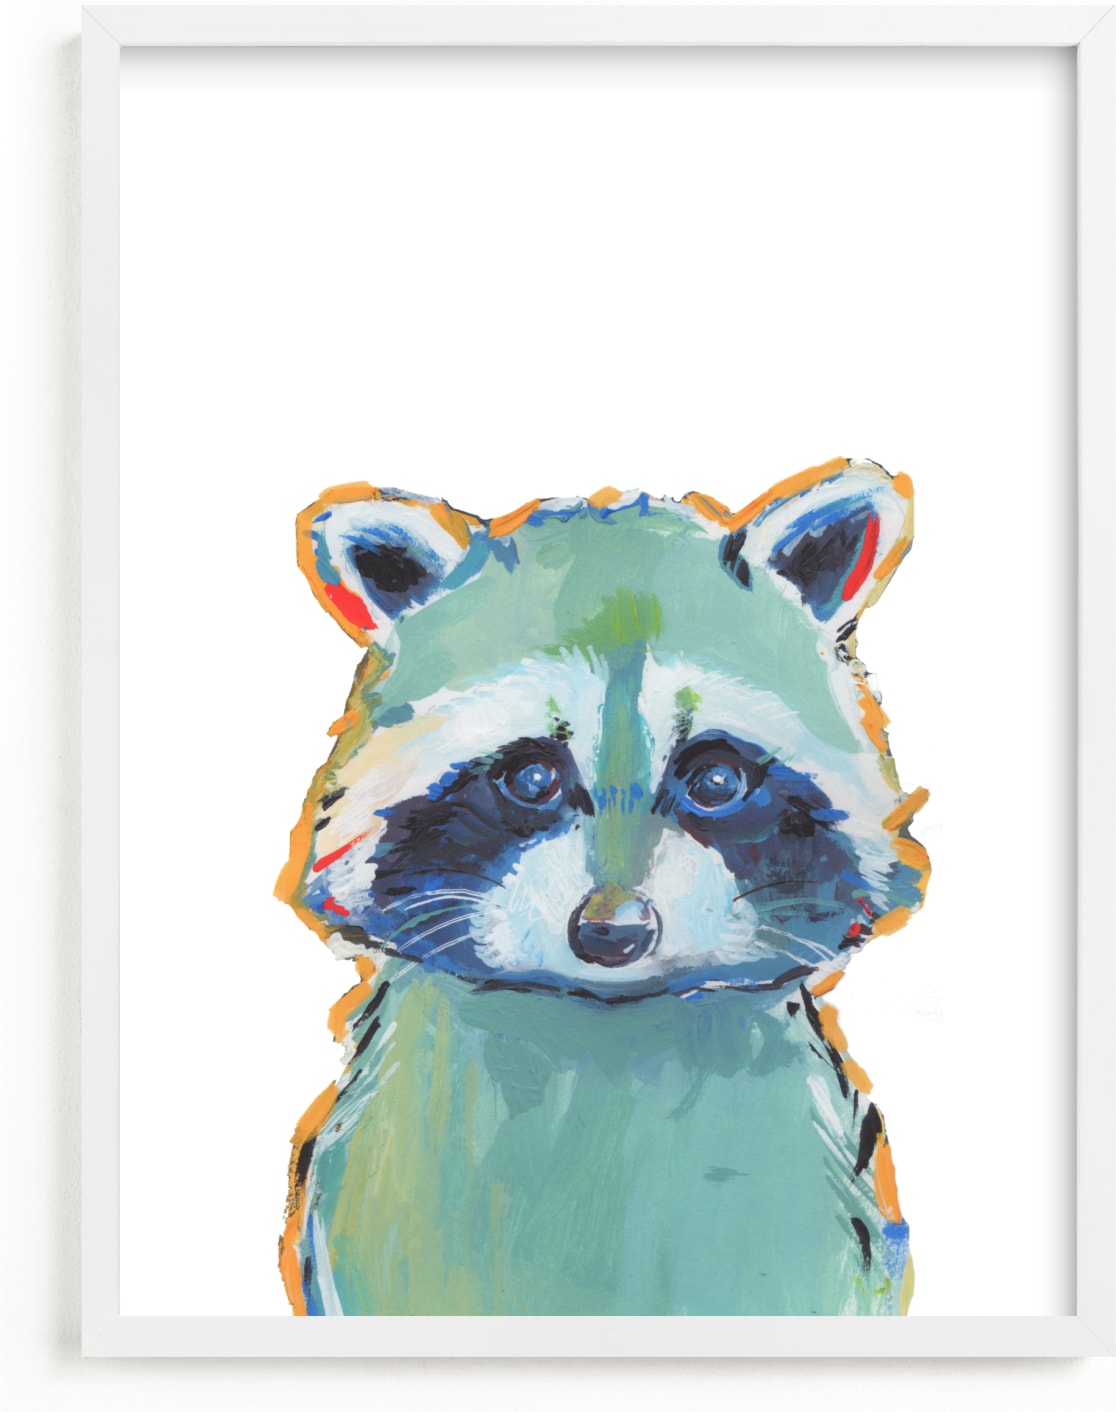 This is a blue kids wall art by Makewells called Mr. Raccoon.